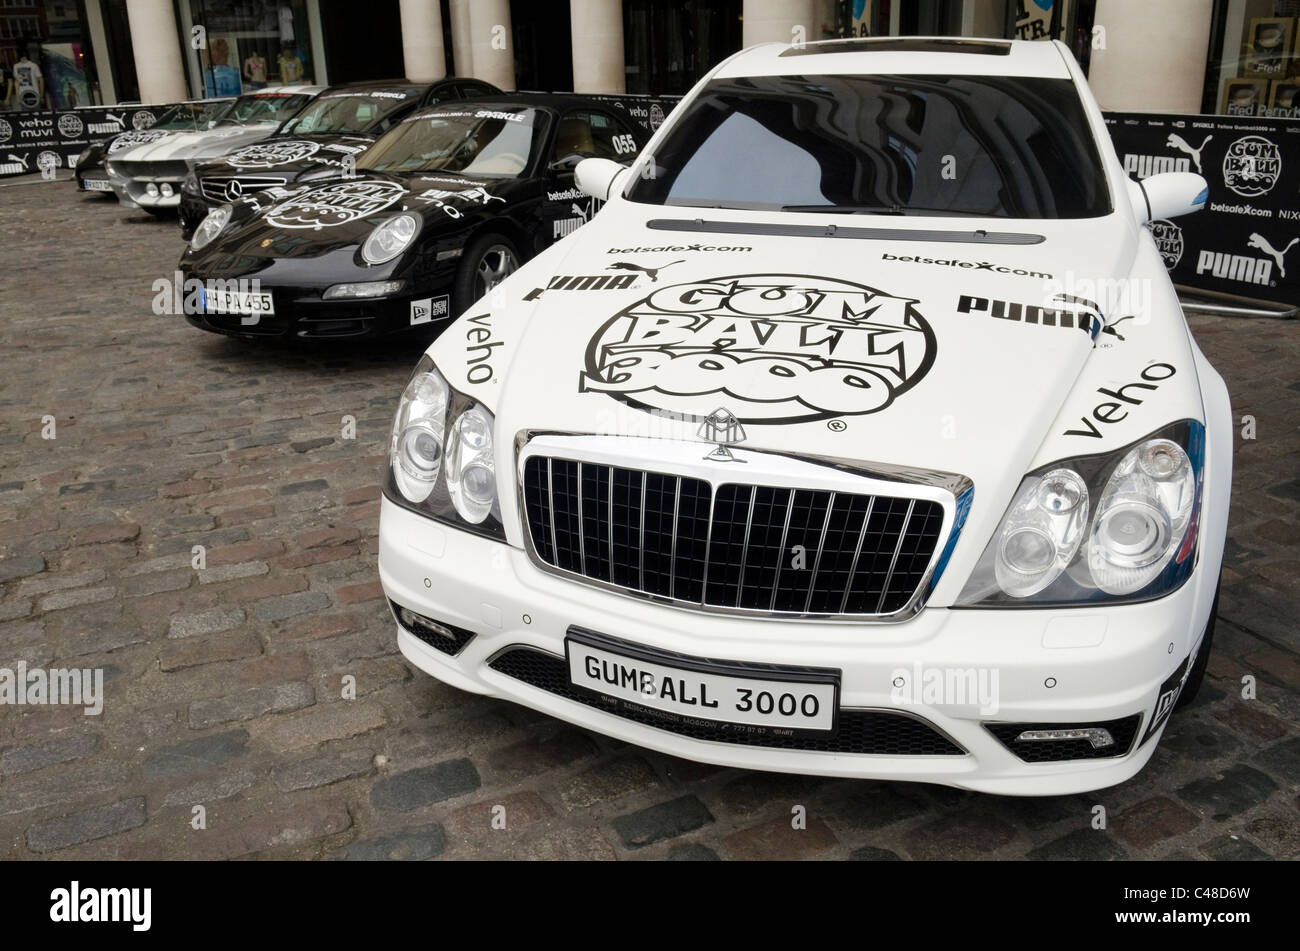 White Maybach with Gumball 3000 decals, stickers and transfers at the start of the Gumball rally Covent Garden Piazza London Stock Photo